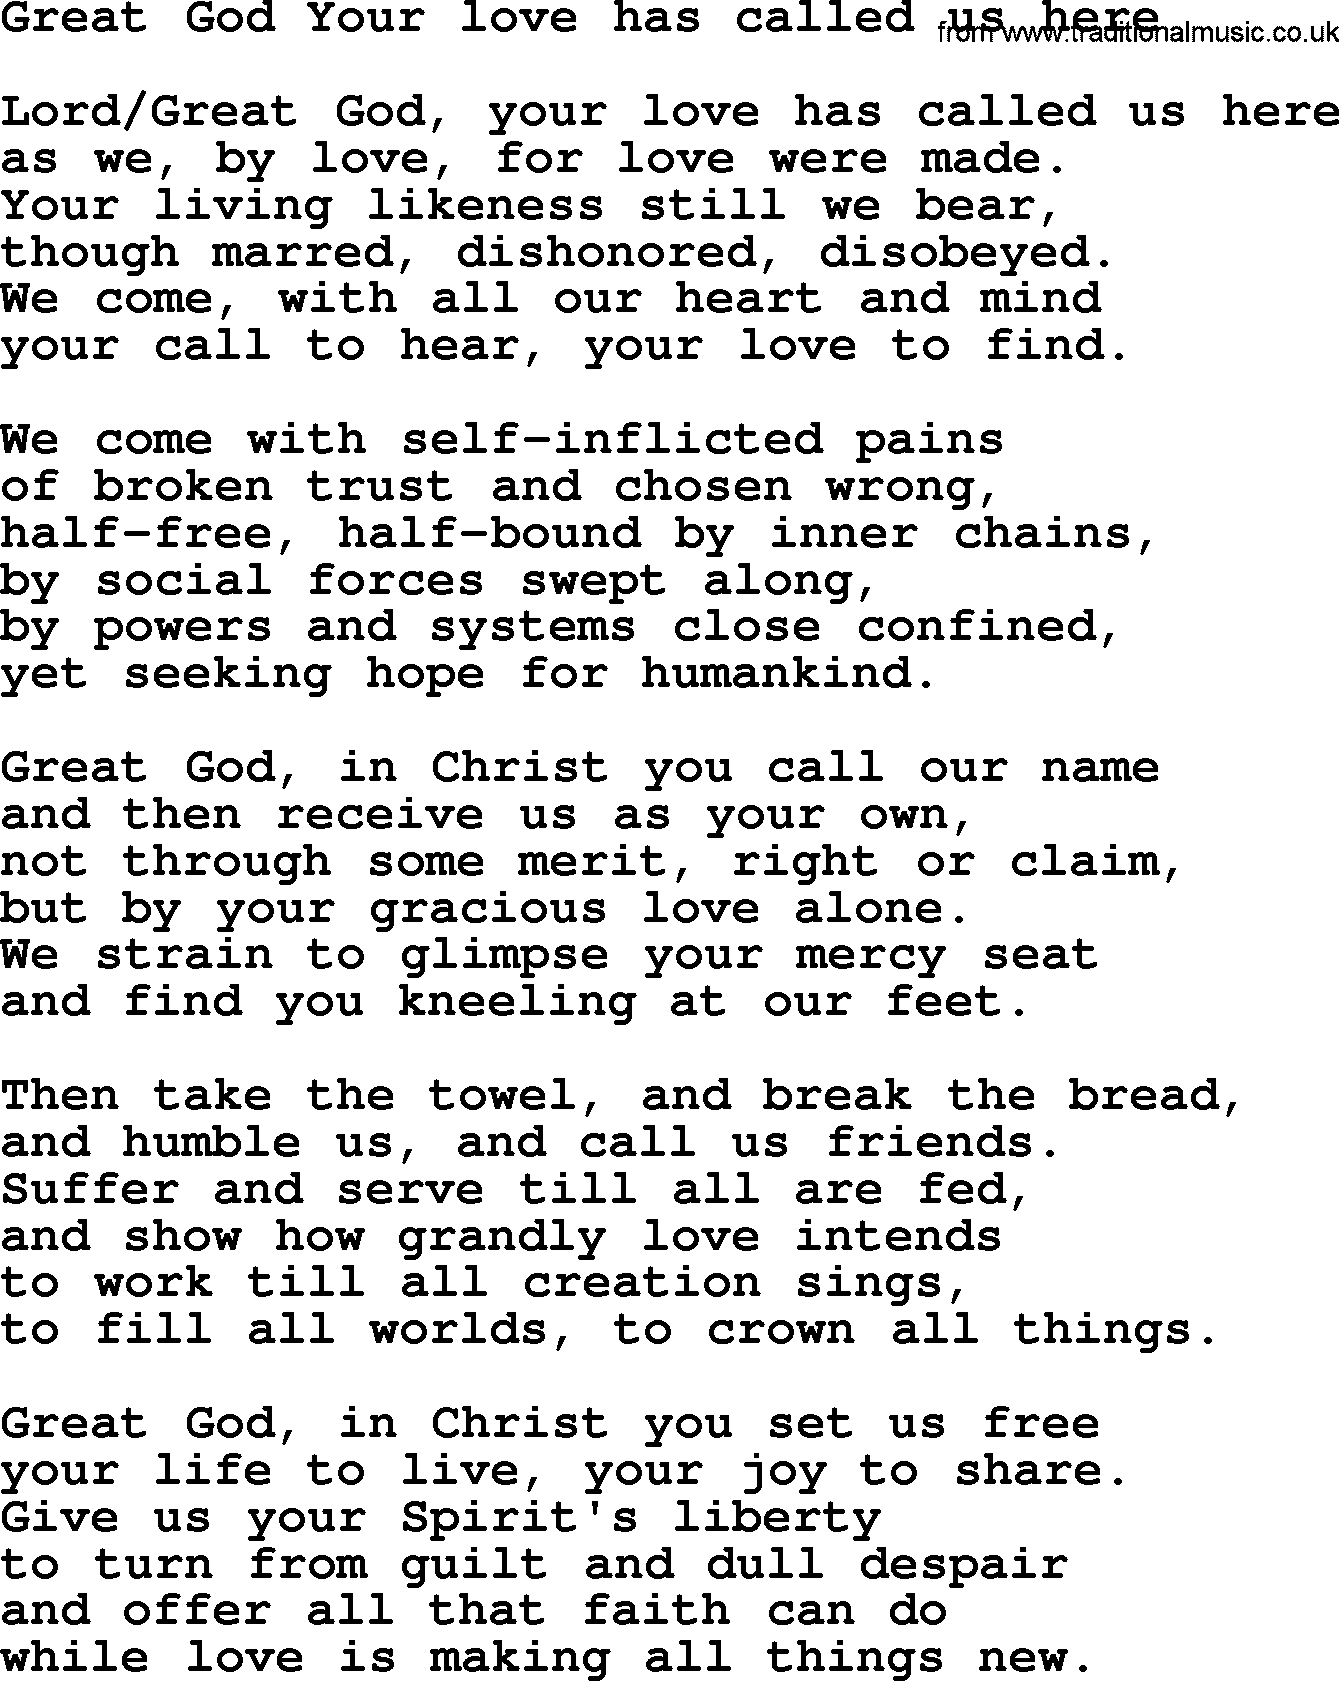 Presbyterian Hymns collection, Hymn: Great God Your Love Has Called Us Here, lyrics and PDF